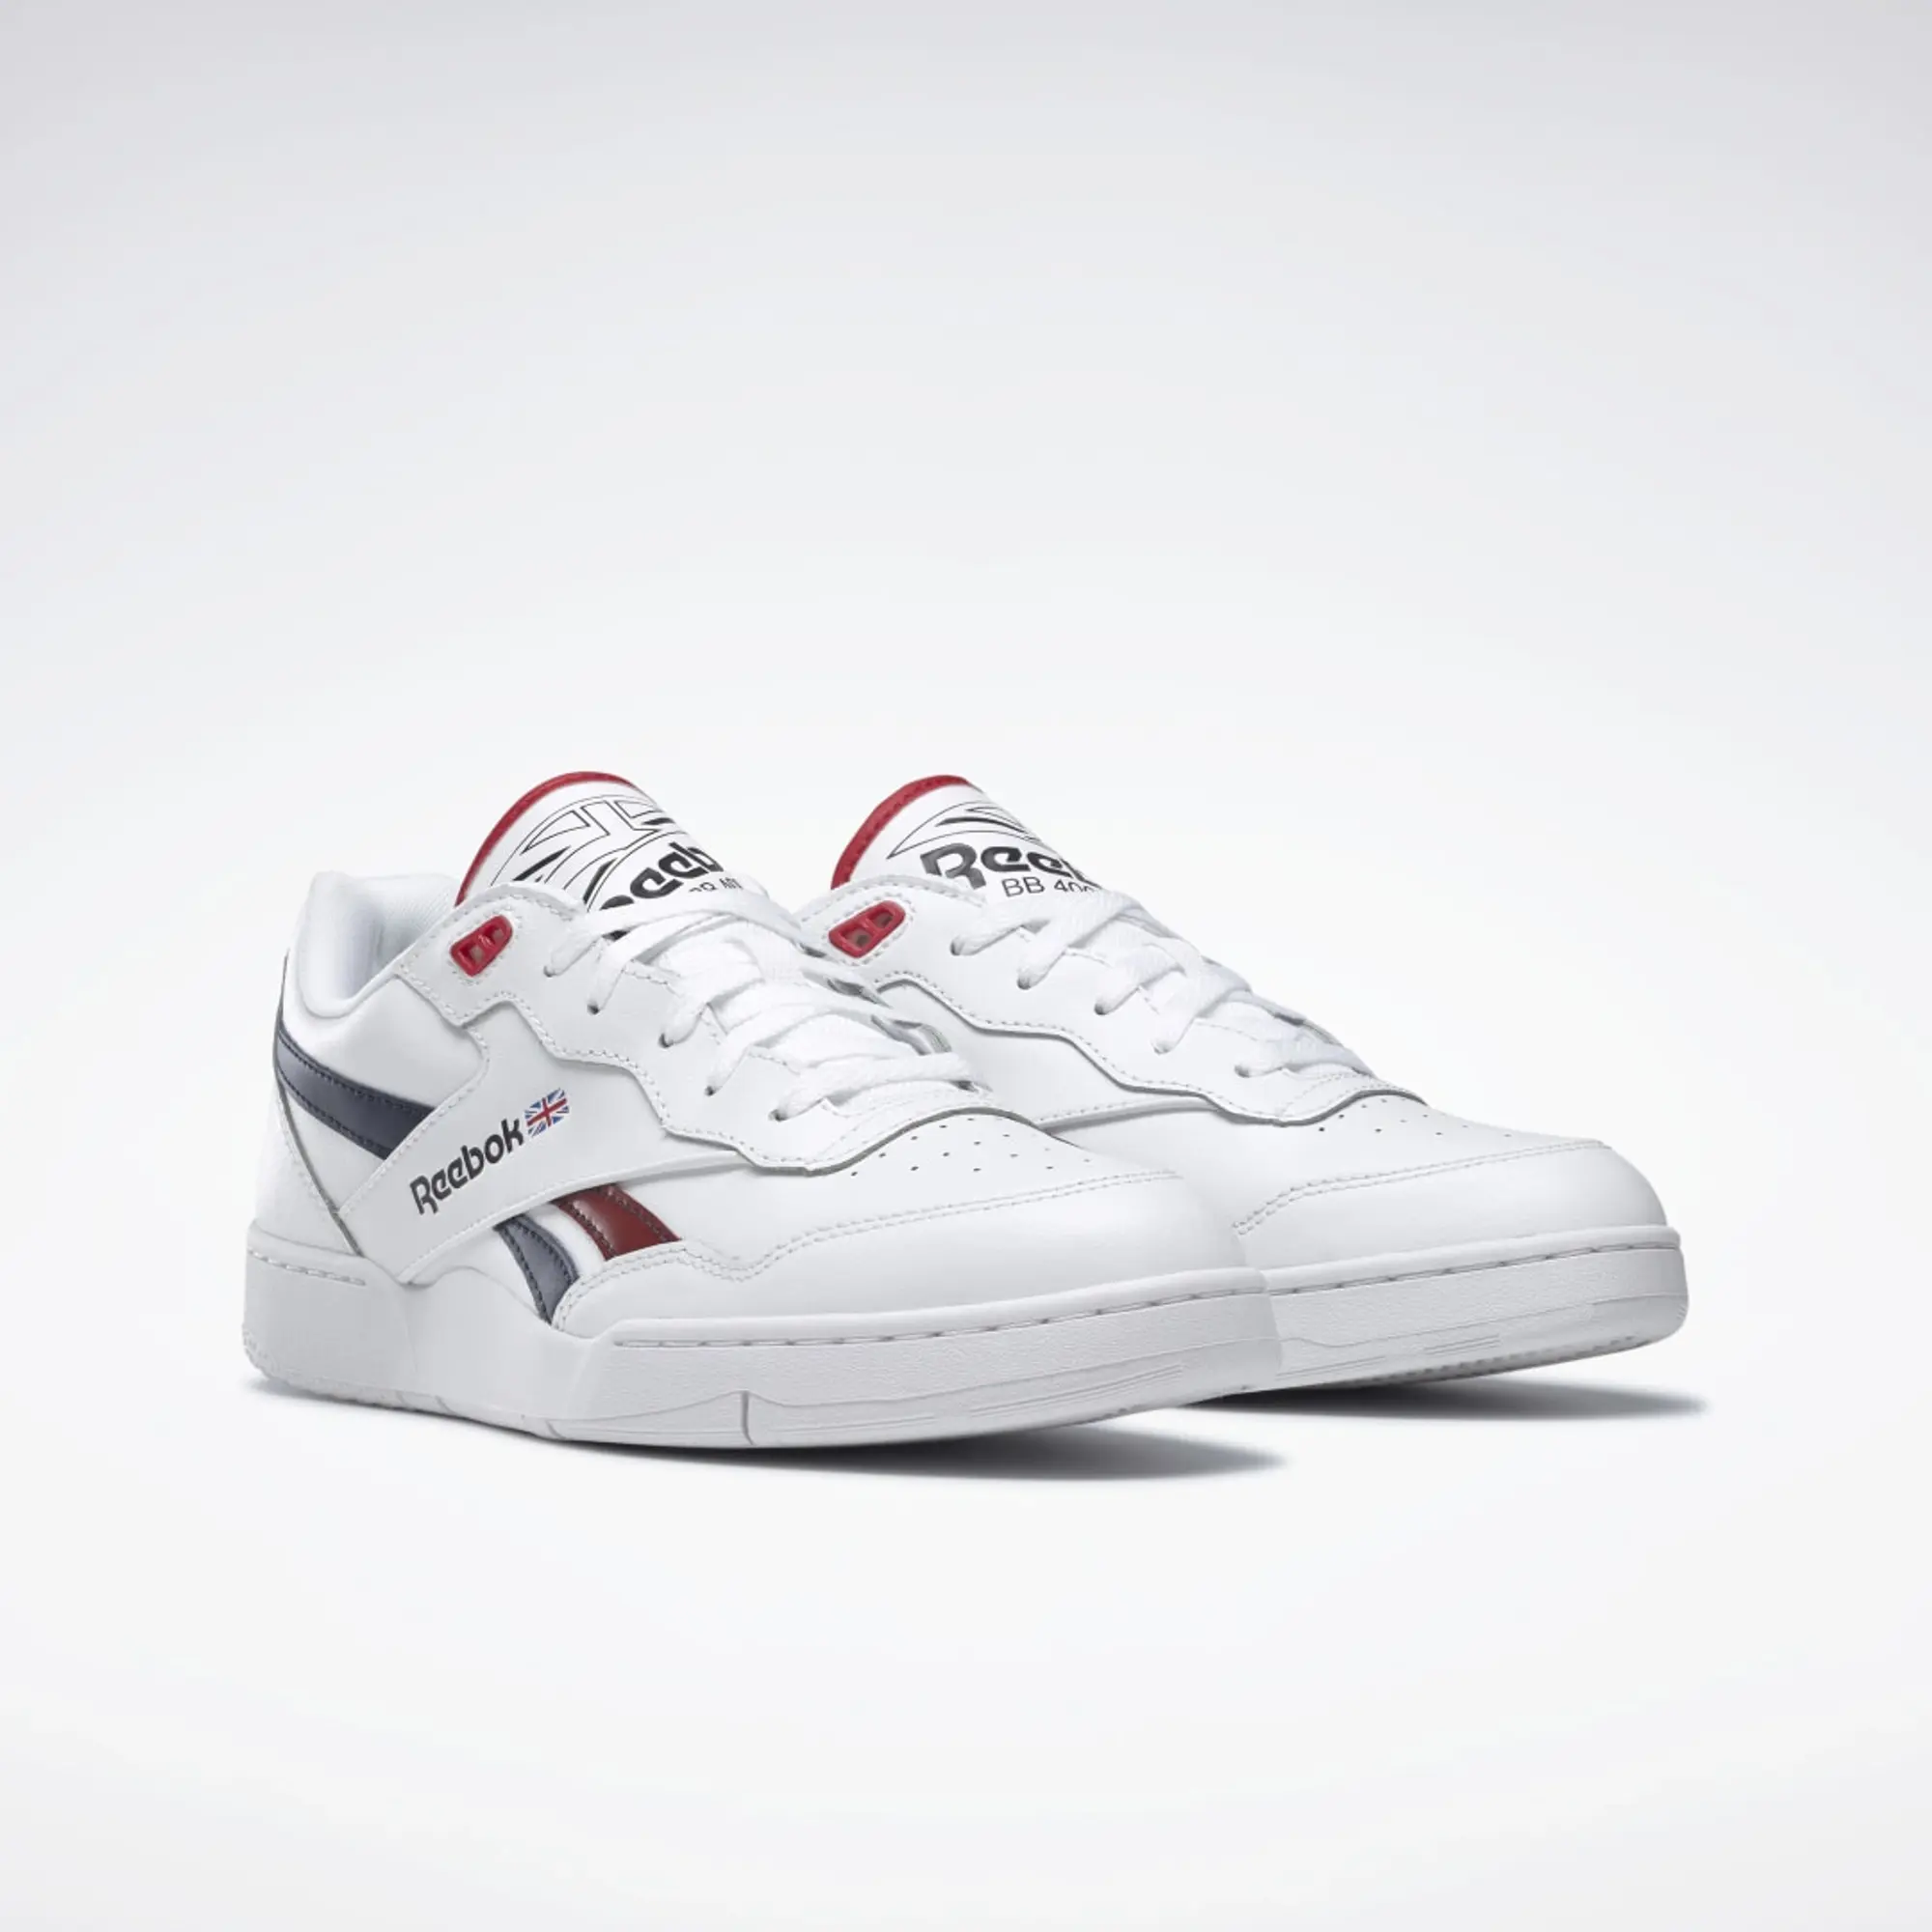 Reebok BB 4000 II Shoes - Cloud White / Vector Navy / Flash Red